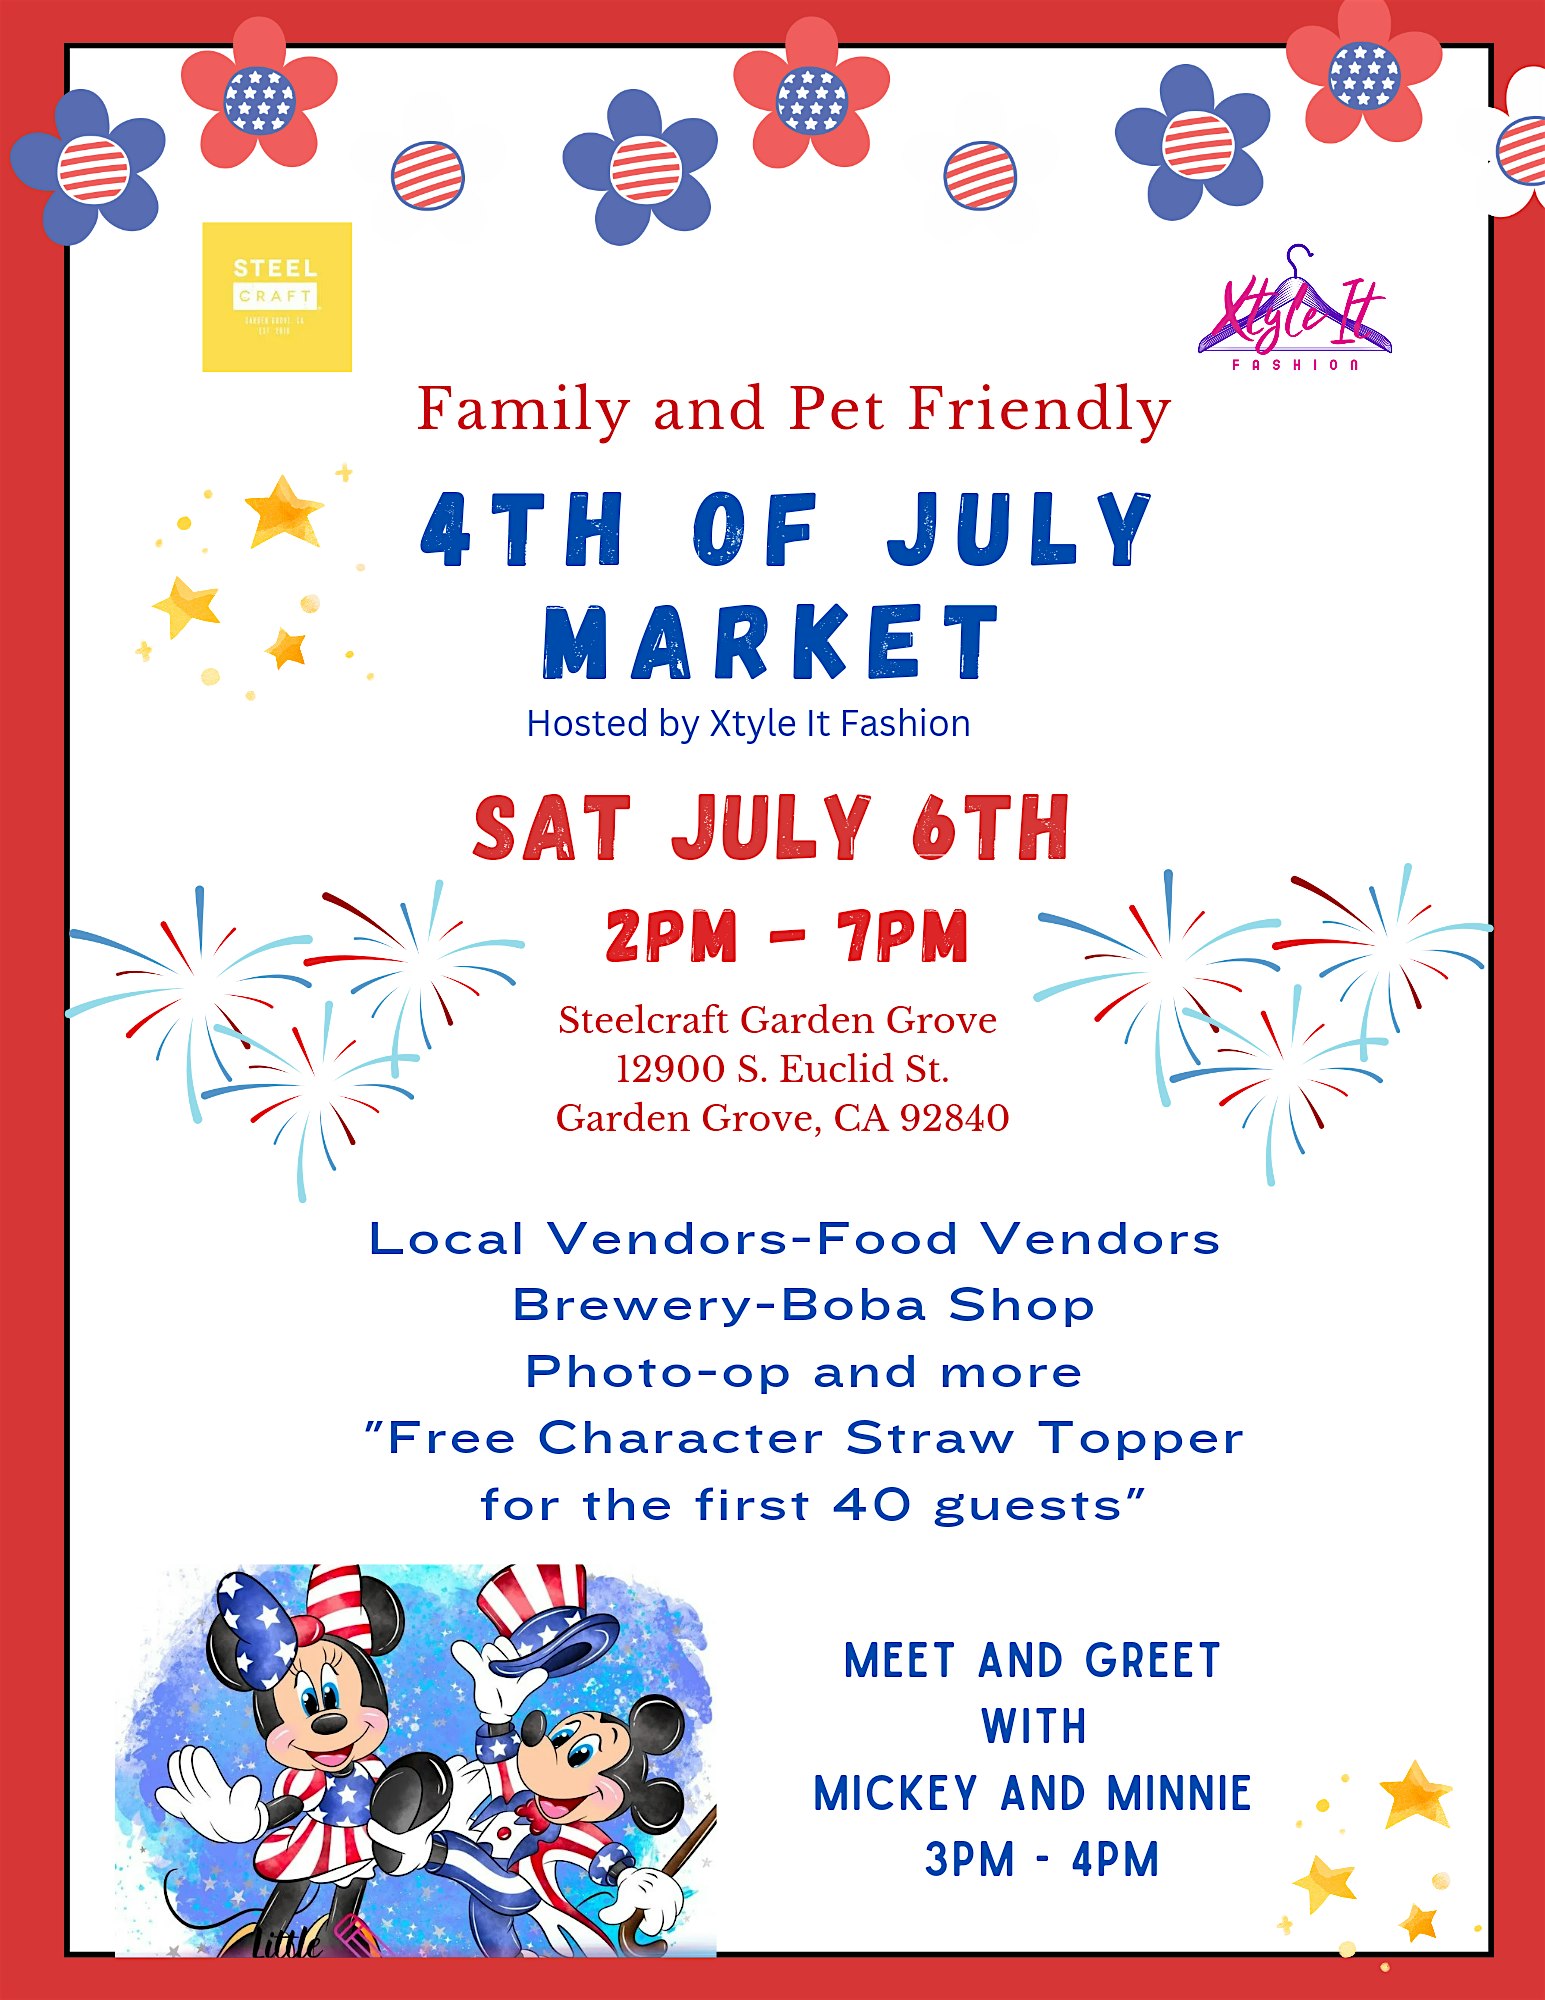 Family Friendly 4th of July Pop-Up, Meet and Greet Mickey and Minnie